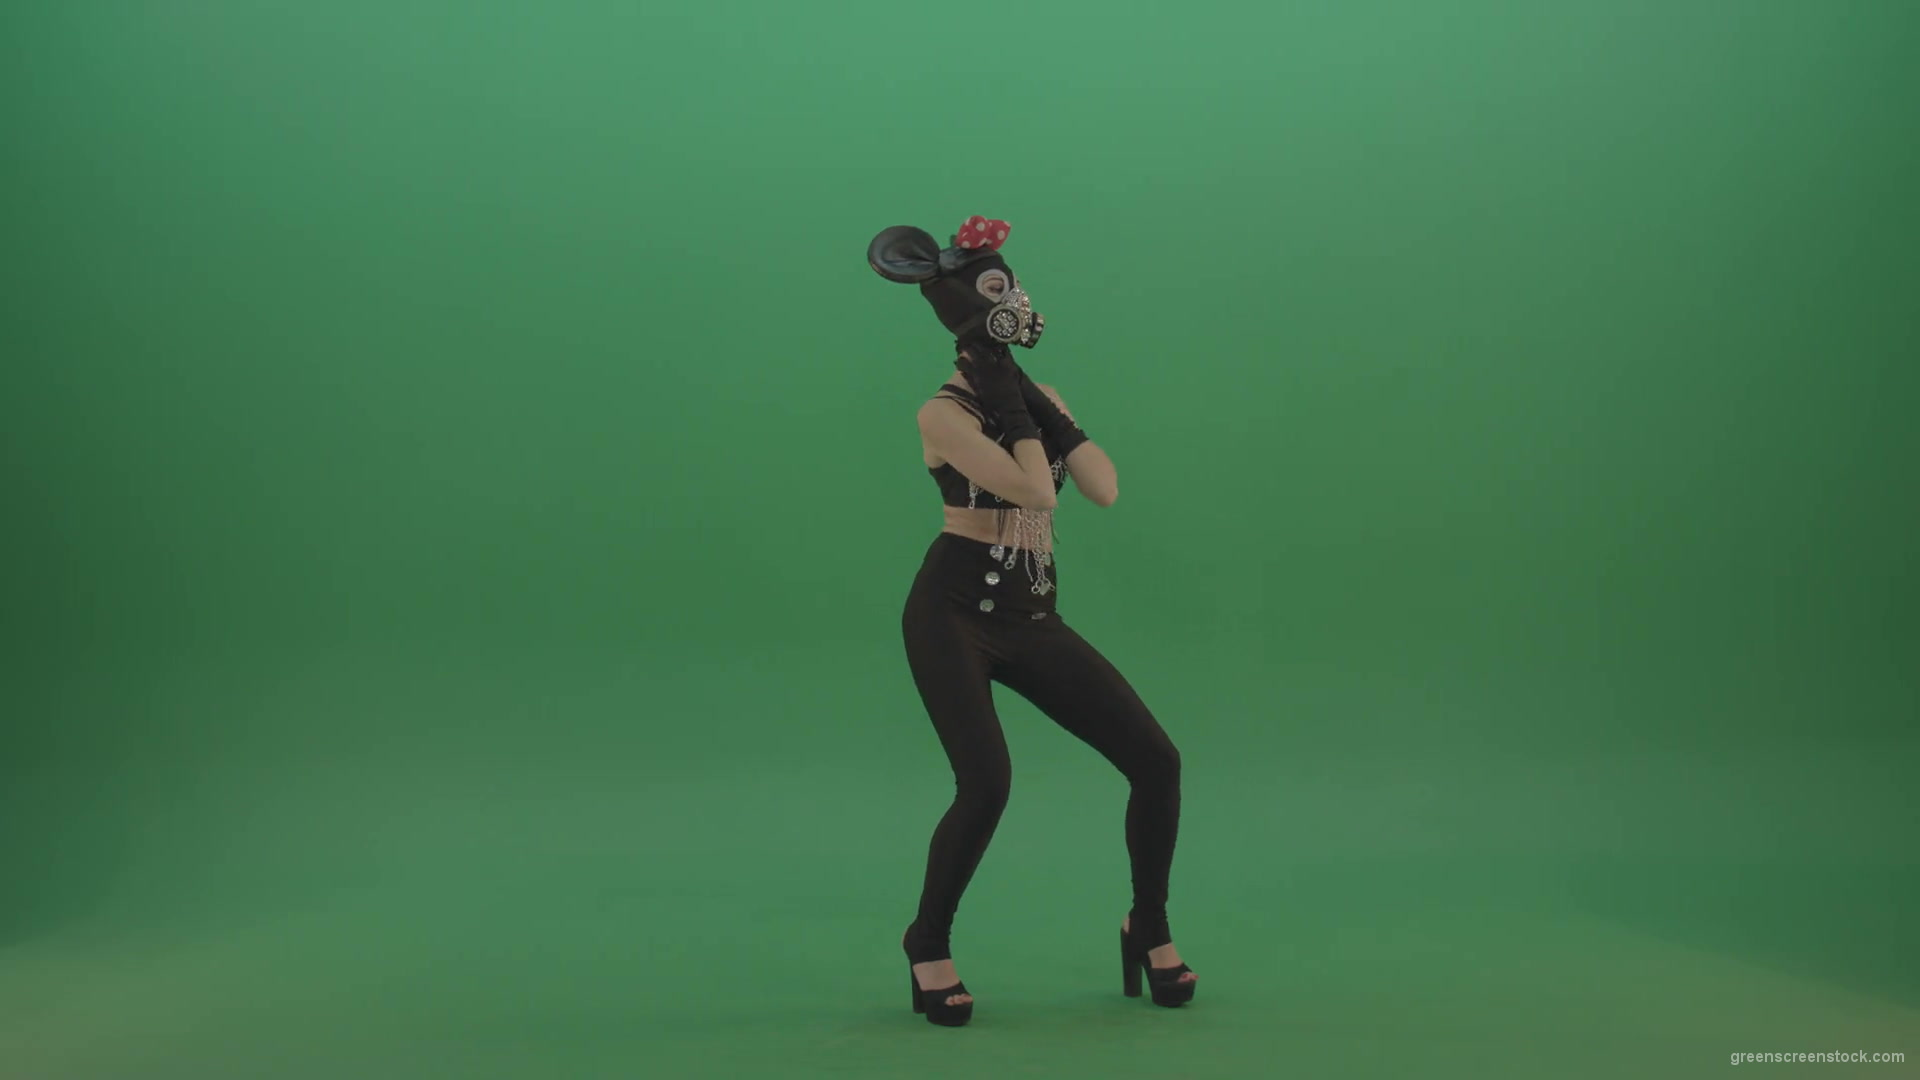 Sexy-dancing-mouse-girl-slowly-dance-in-mask-on-green-screen-1920_009 Green Screen Stock